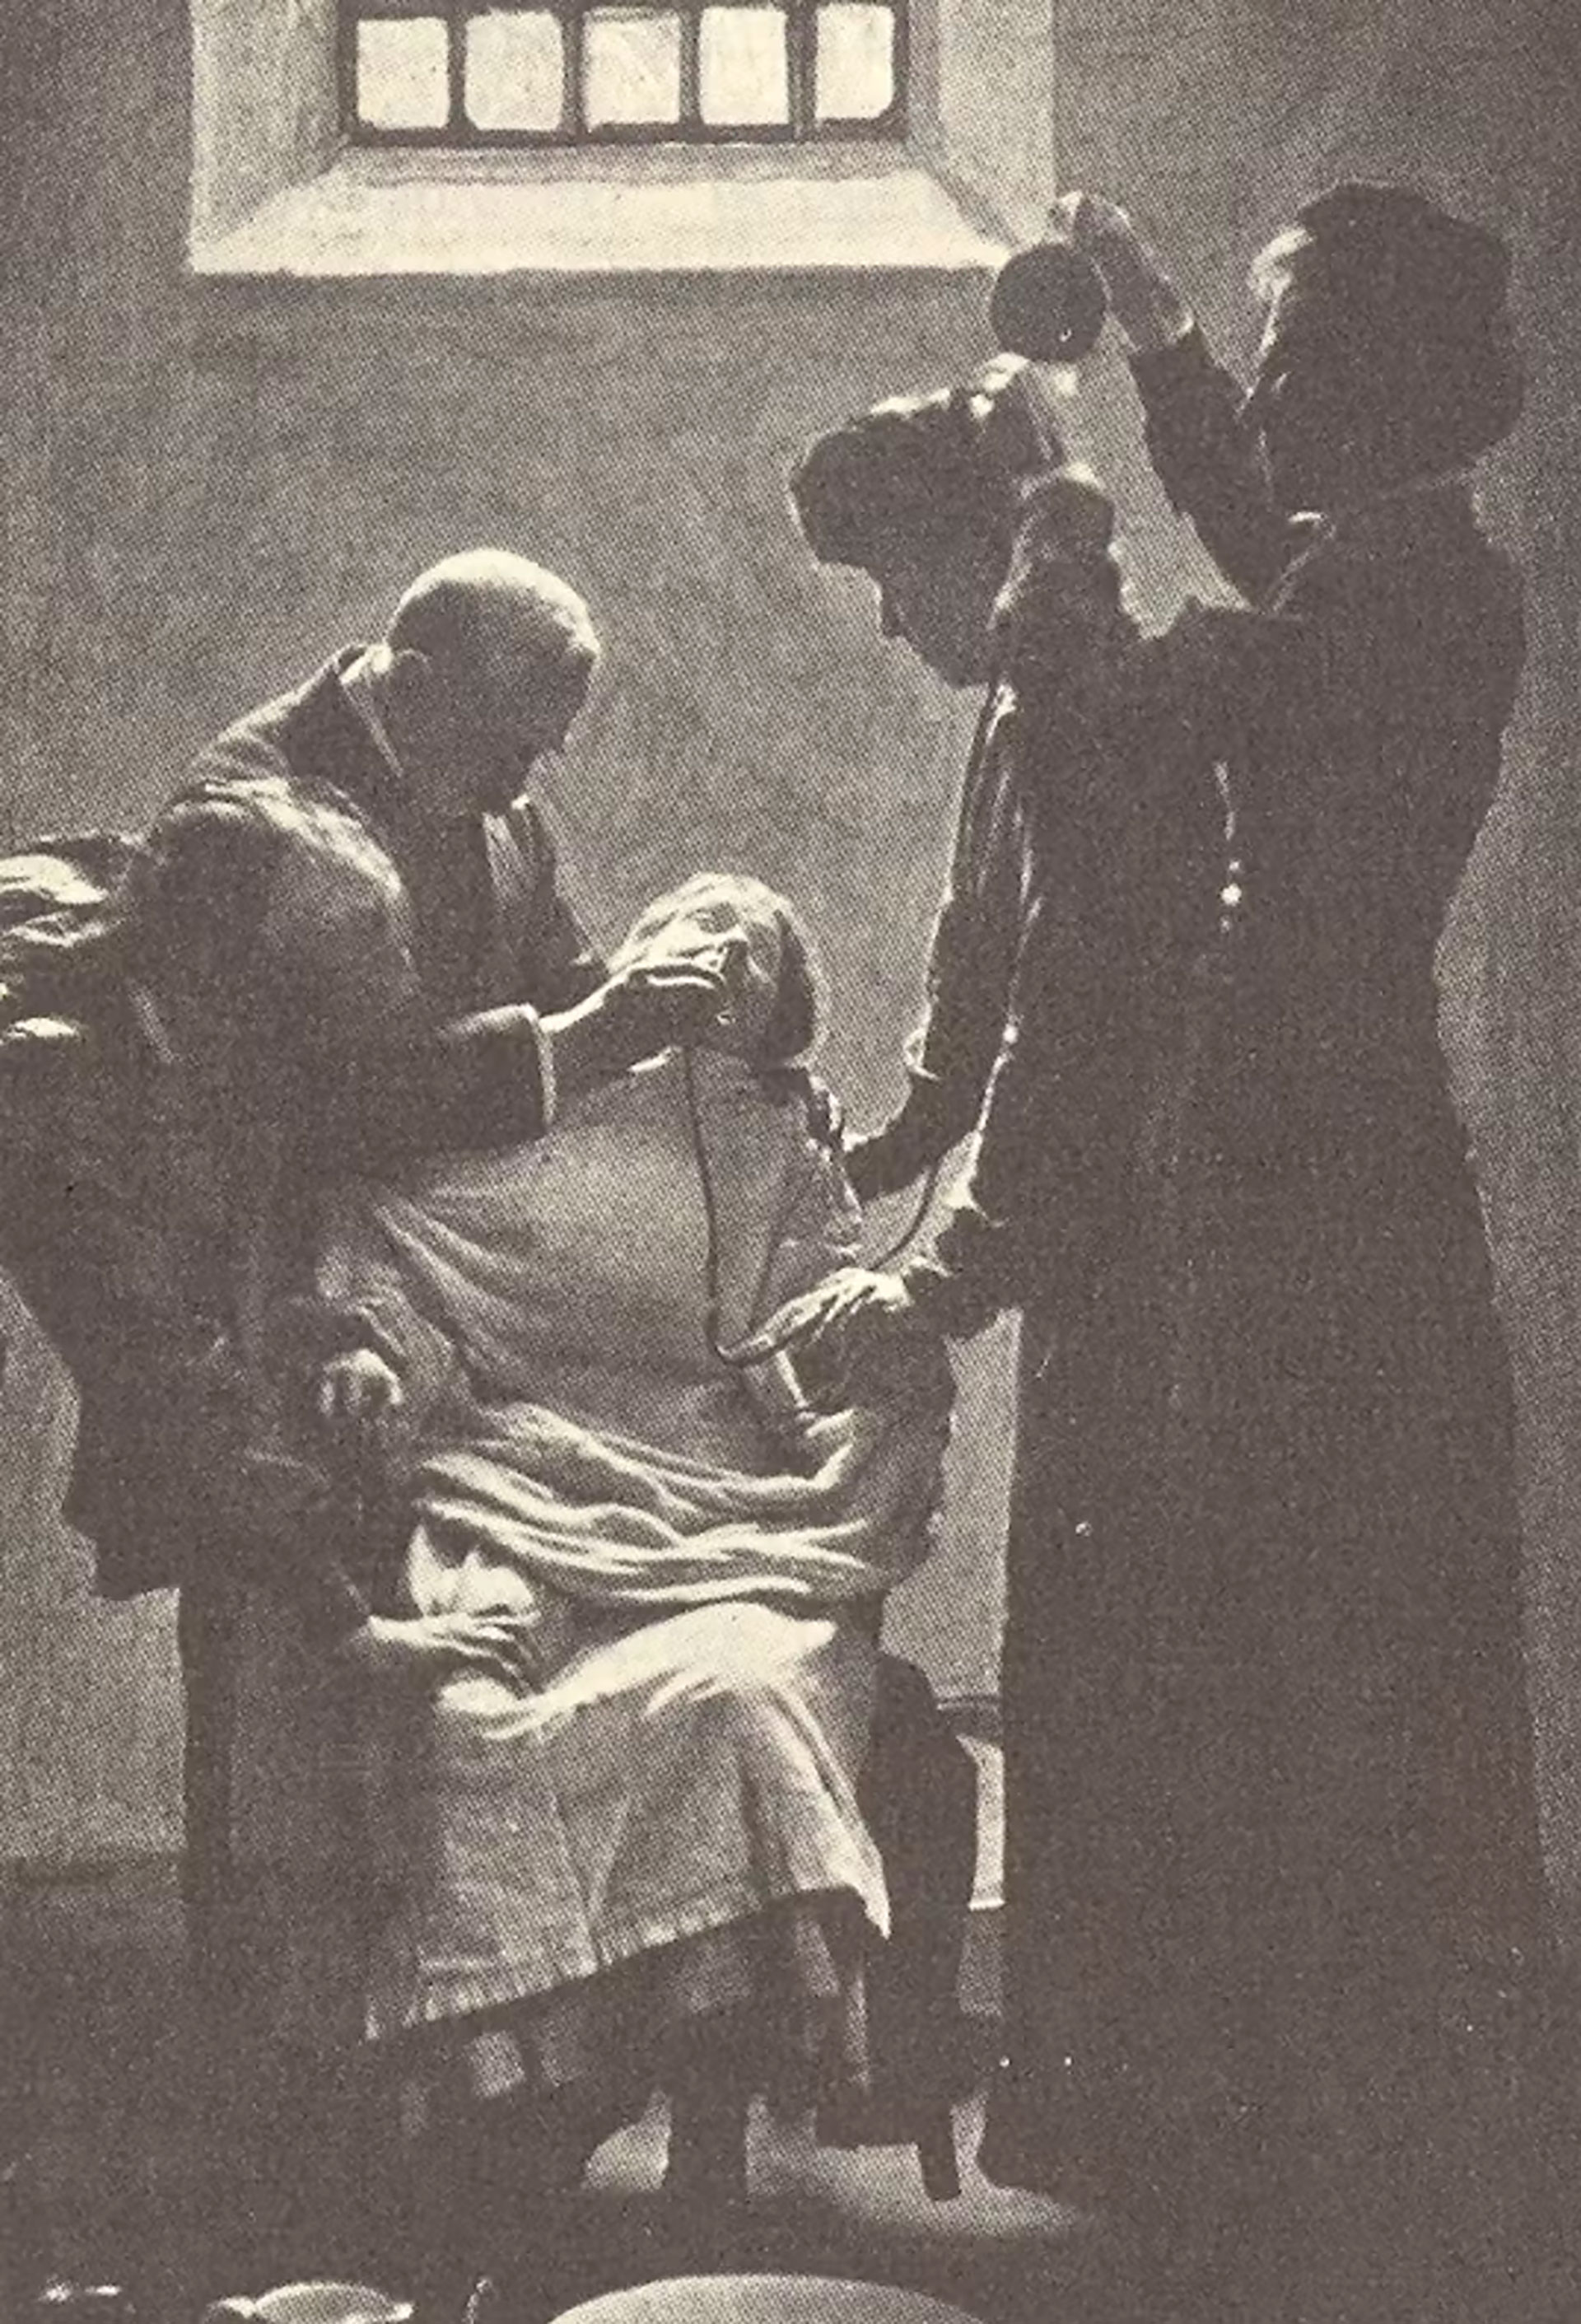 A suffragette on a hunger strike is force-fed with a nose tube (The Conversation)